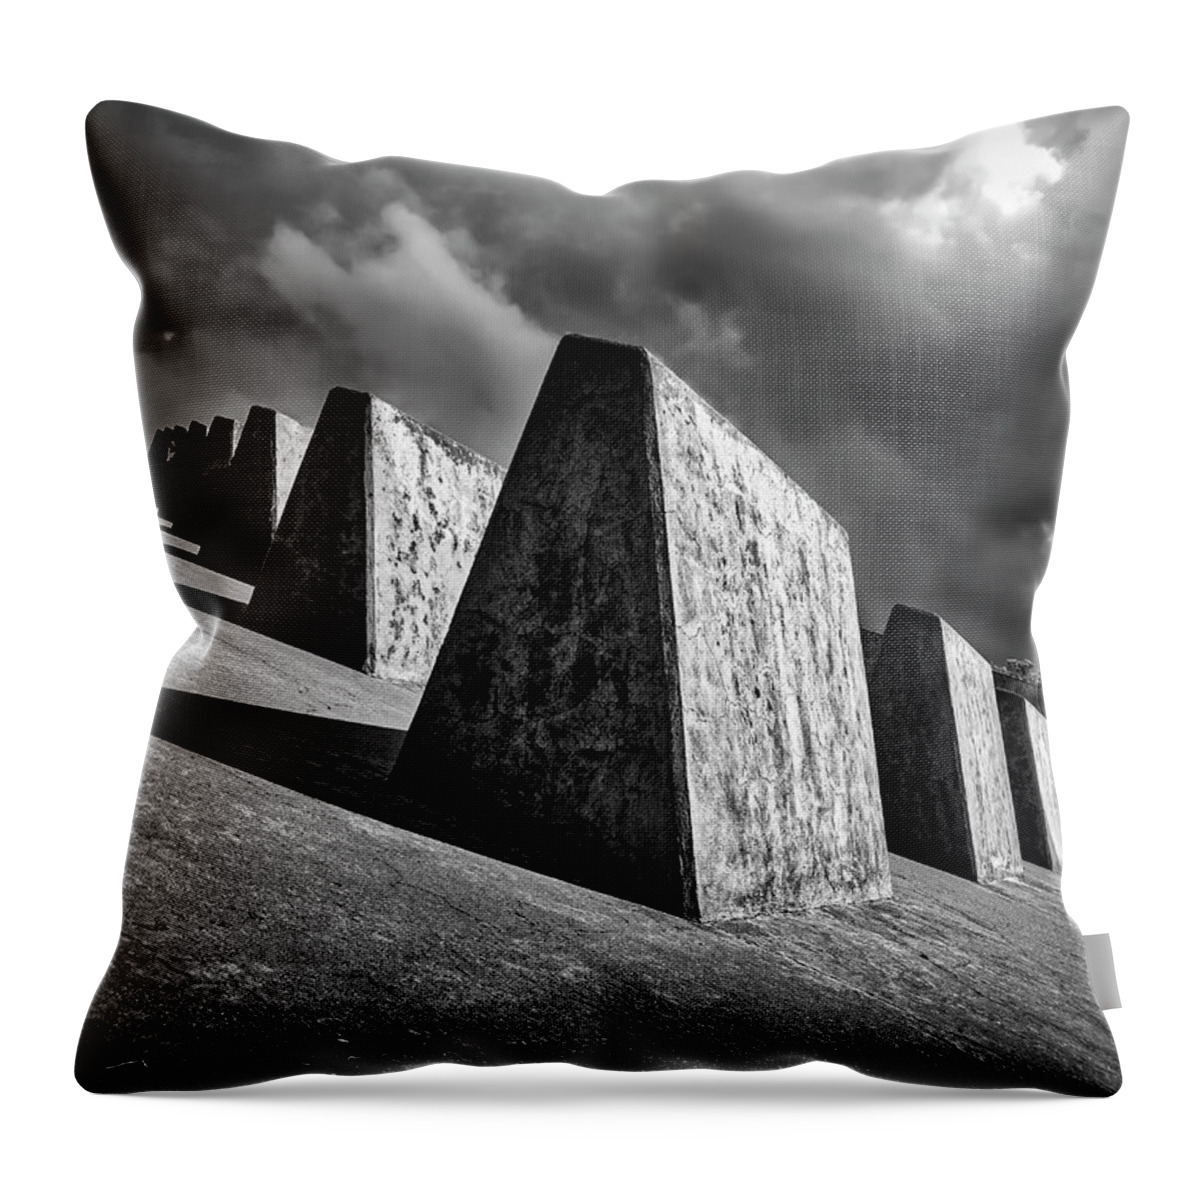 Albuquerque Throw Pillow featuring the photograph Stone And Sky by Mark David Gerson